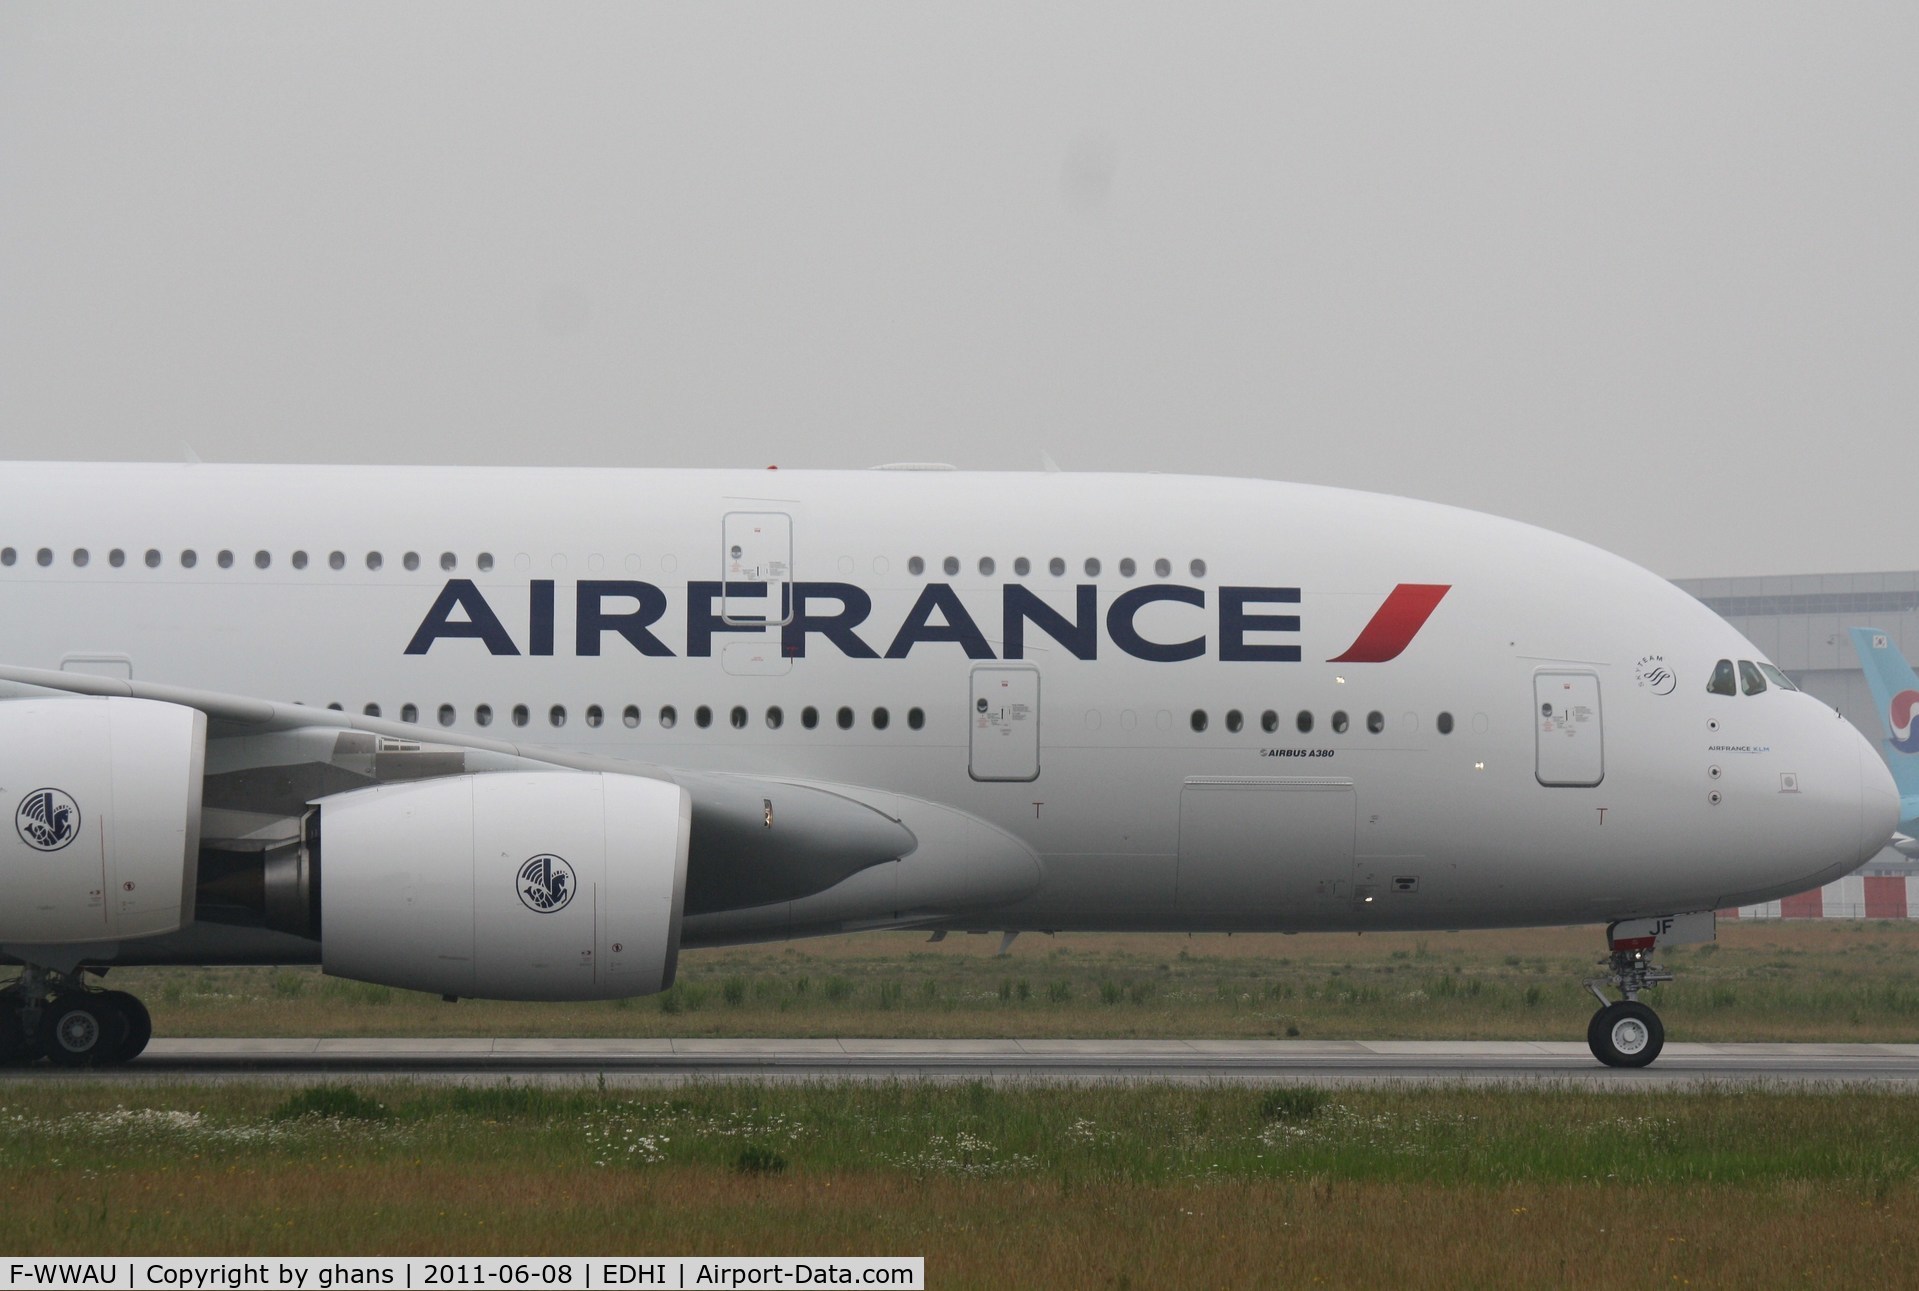 F-WWAU, 2010 Airbus A380-861 C/N 064, to become F-HPJF